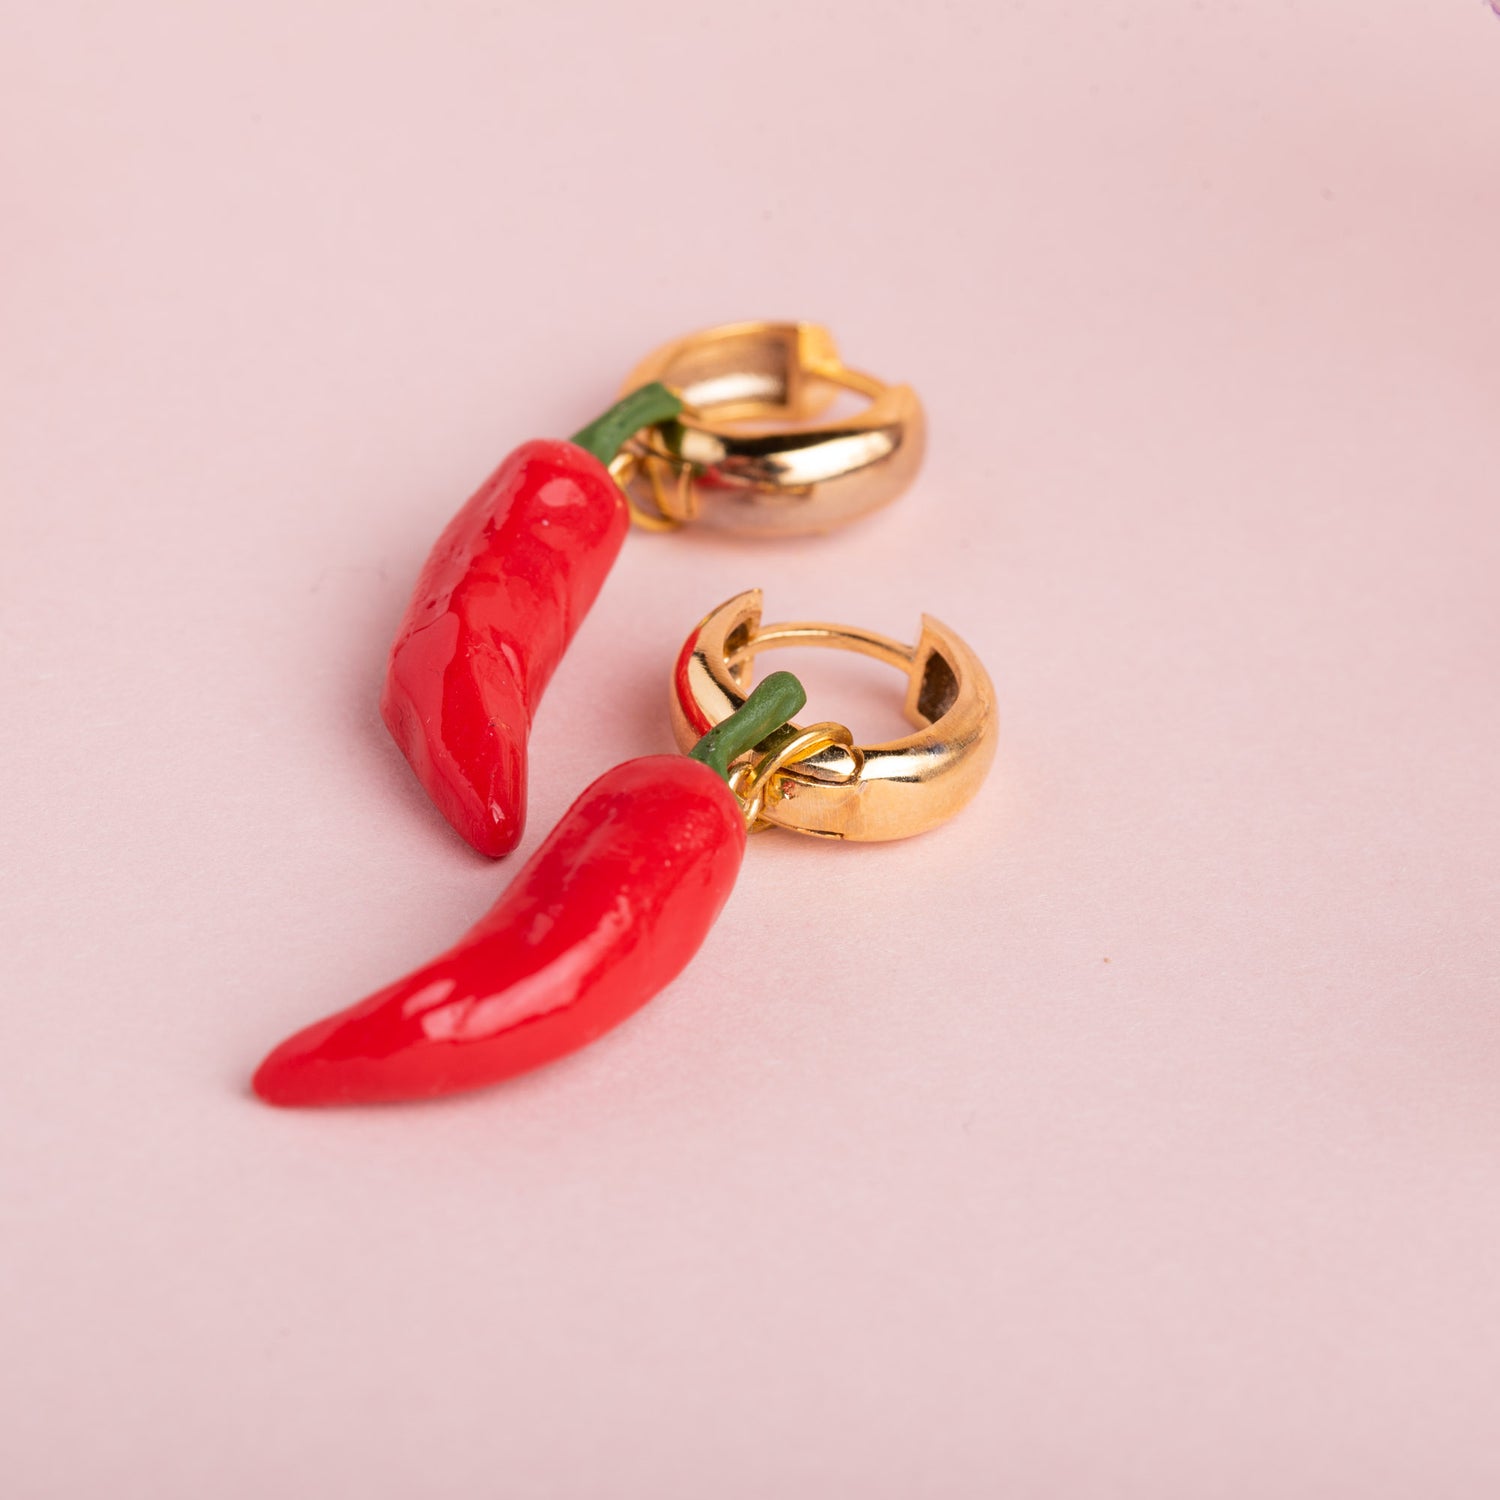 red hot chili peppers handmade polymer clay hoop earrings